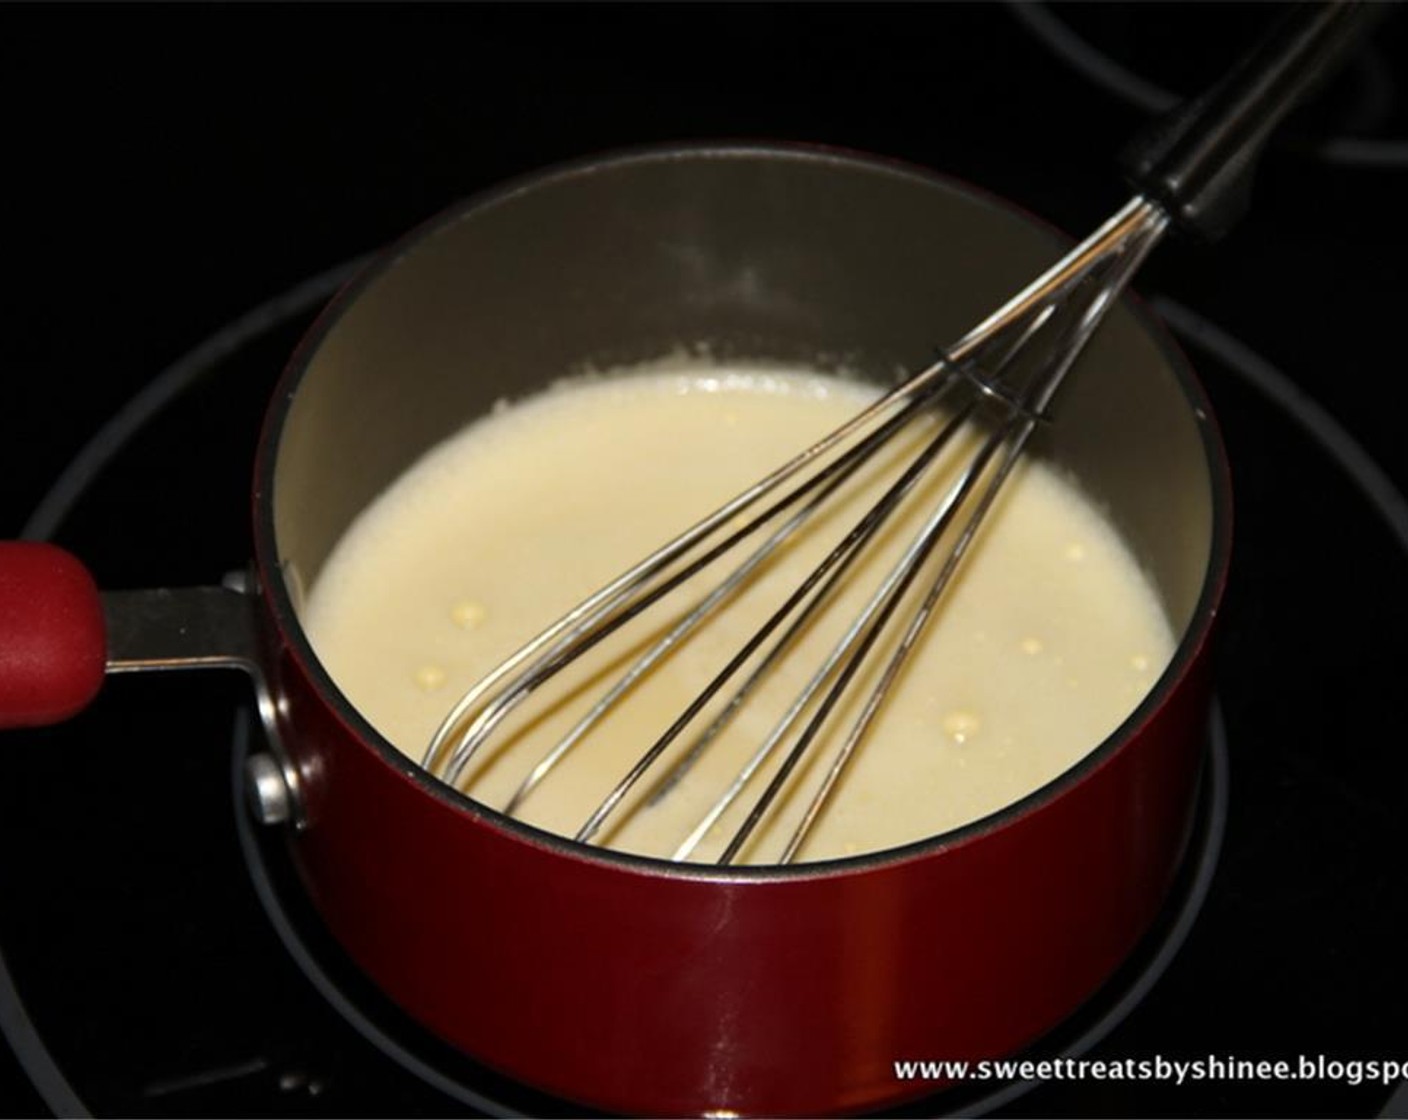 step 4 Transfer the egg yolk mixture into a small saucepan and heat over low heat, stirring frequently. Continue to cook until it’s thick like pudding. Transfer the mixture back to the bowl and bring it to room temperature.